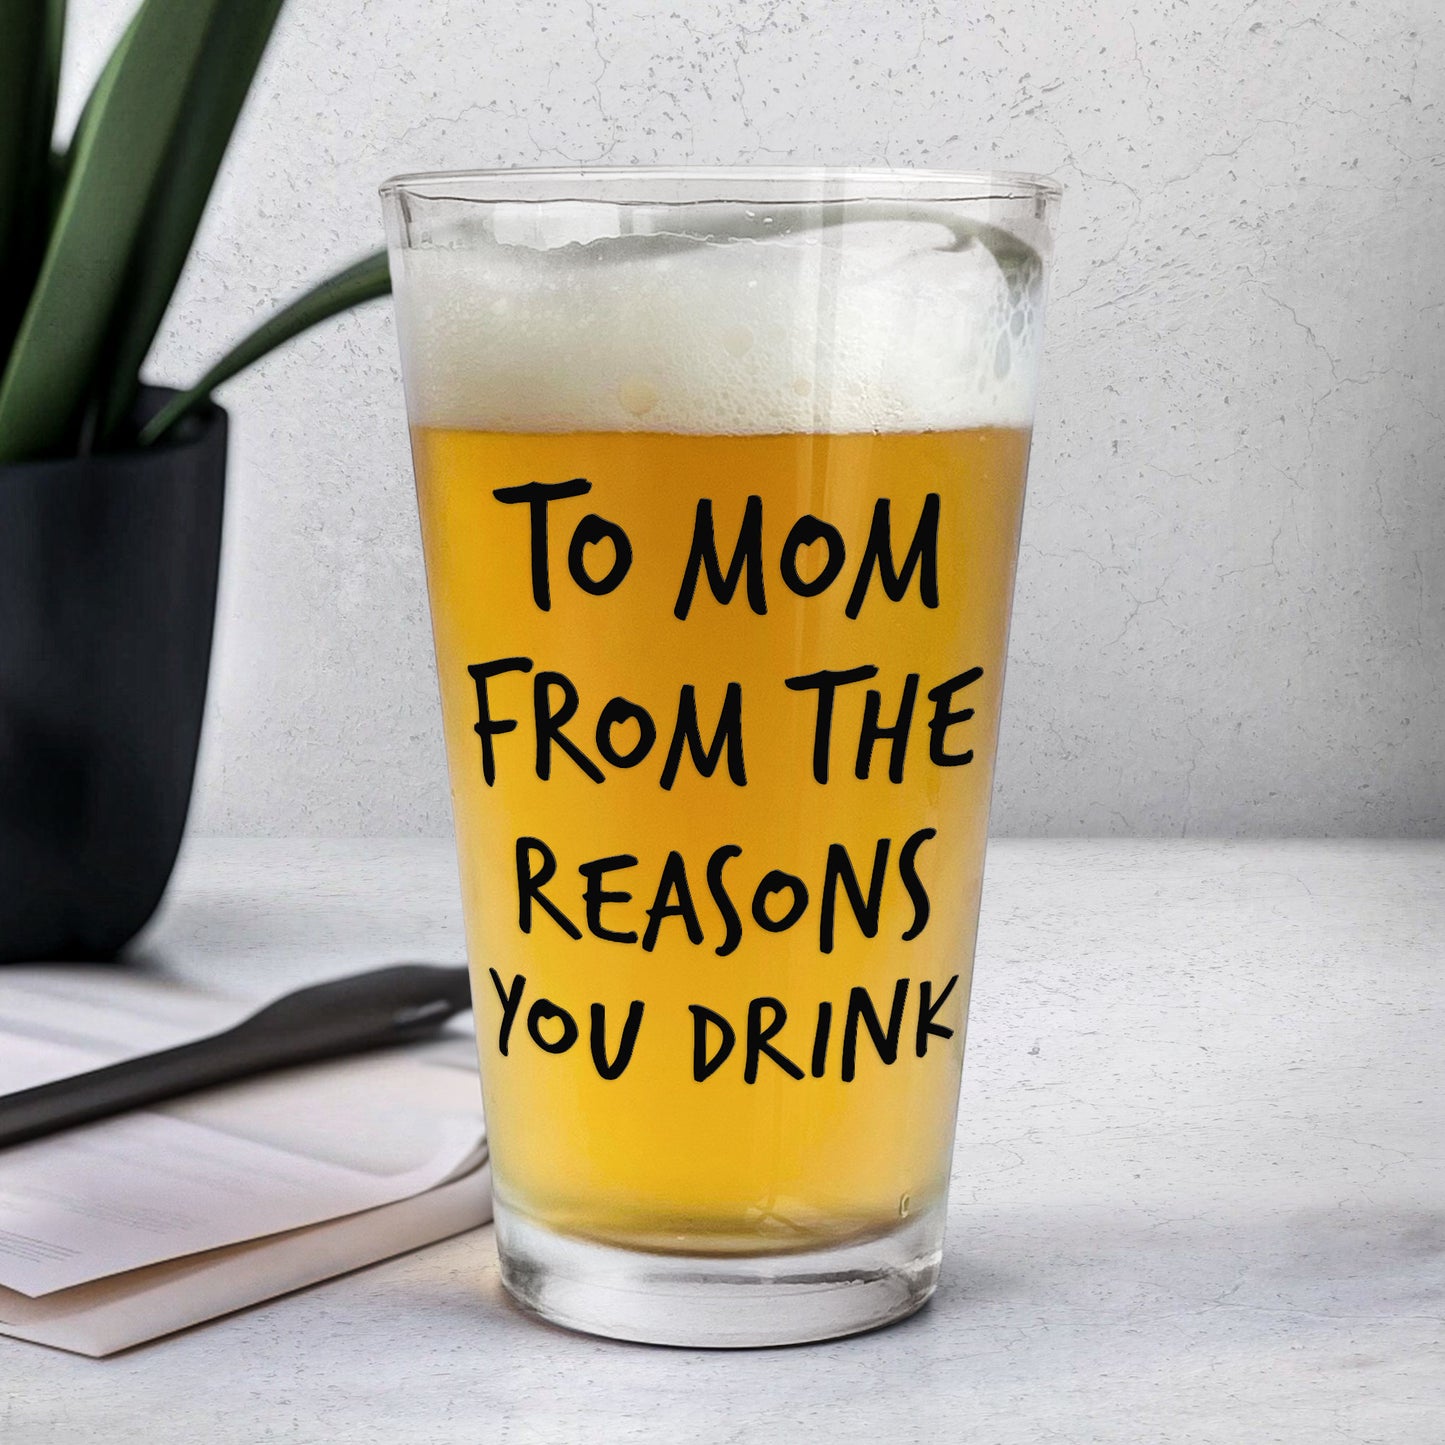 To Mom From The Reasons You Drink - Personalized Photo Beer Glass